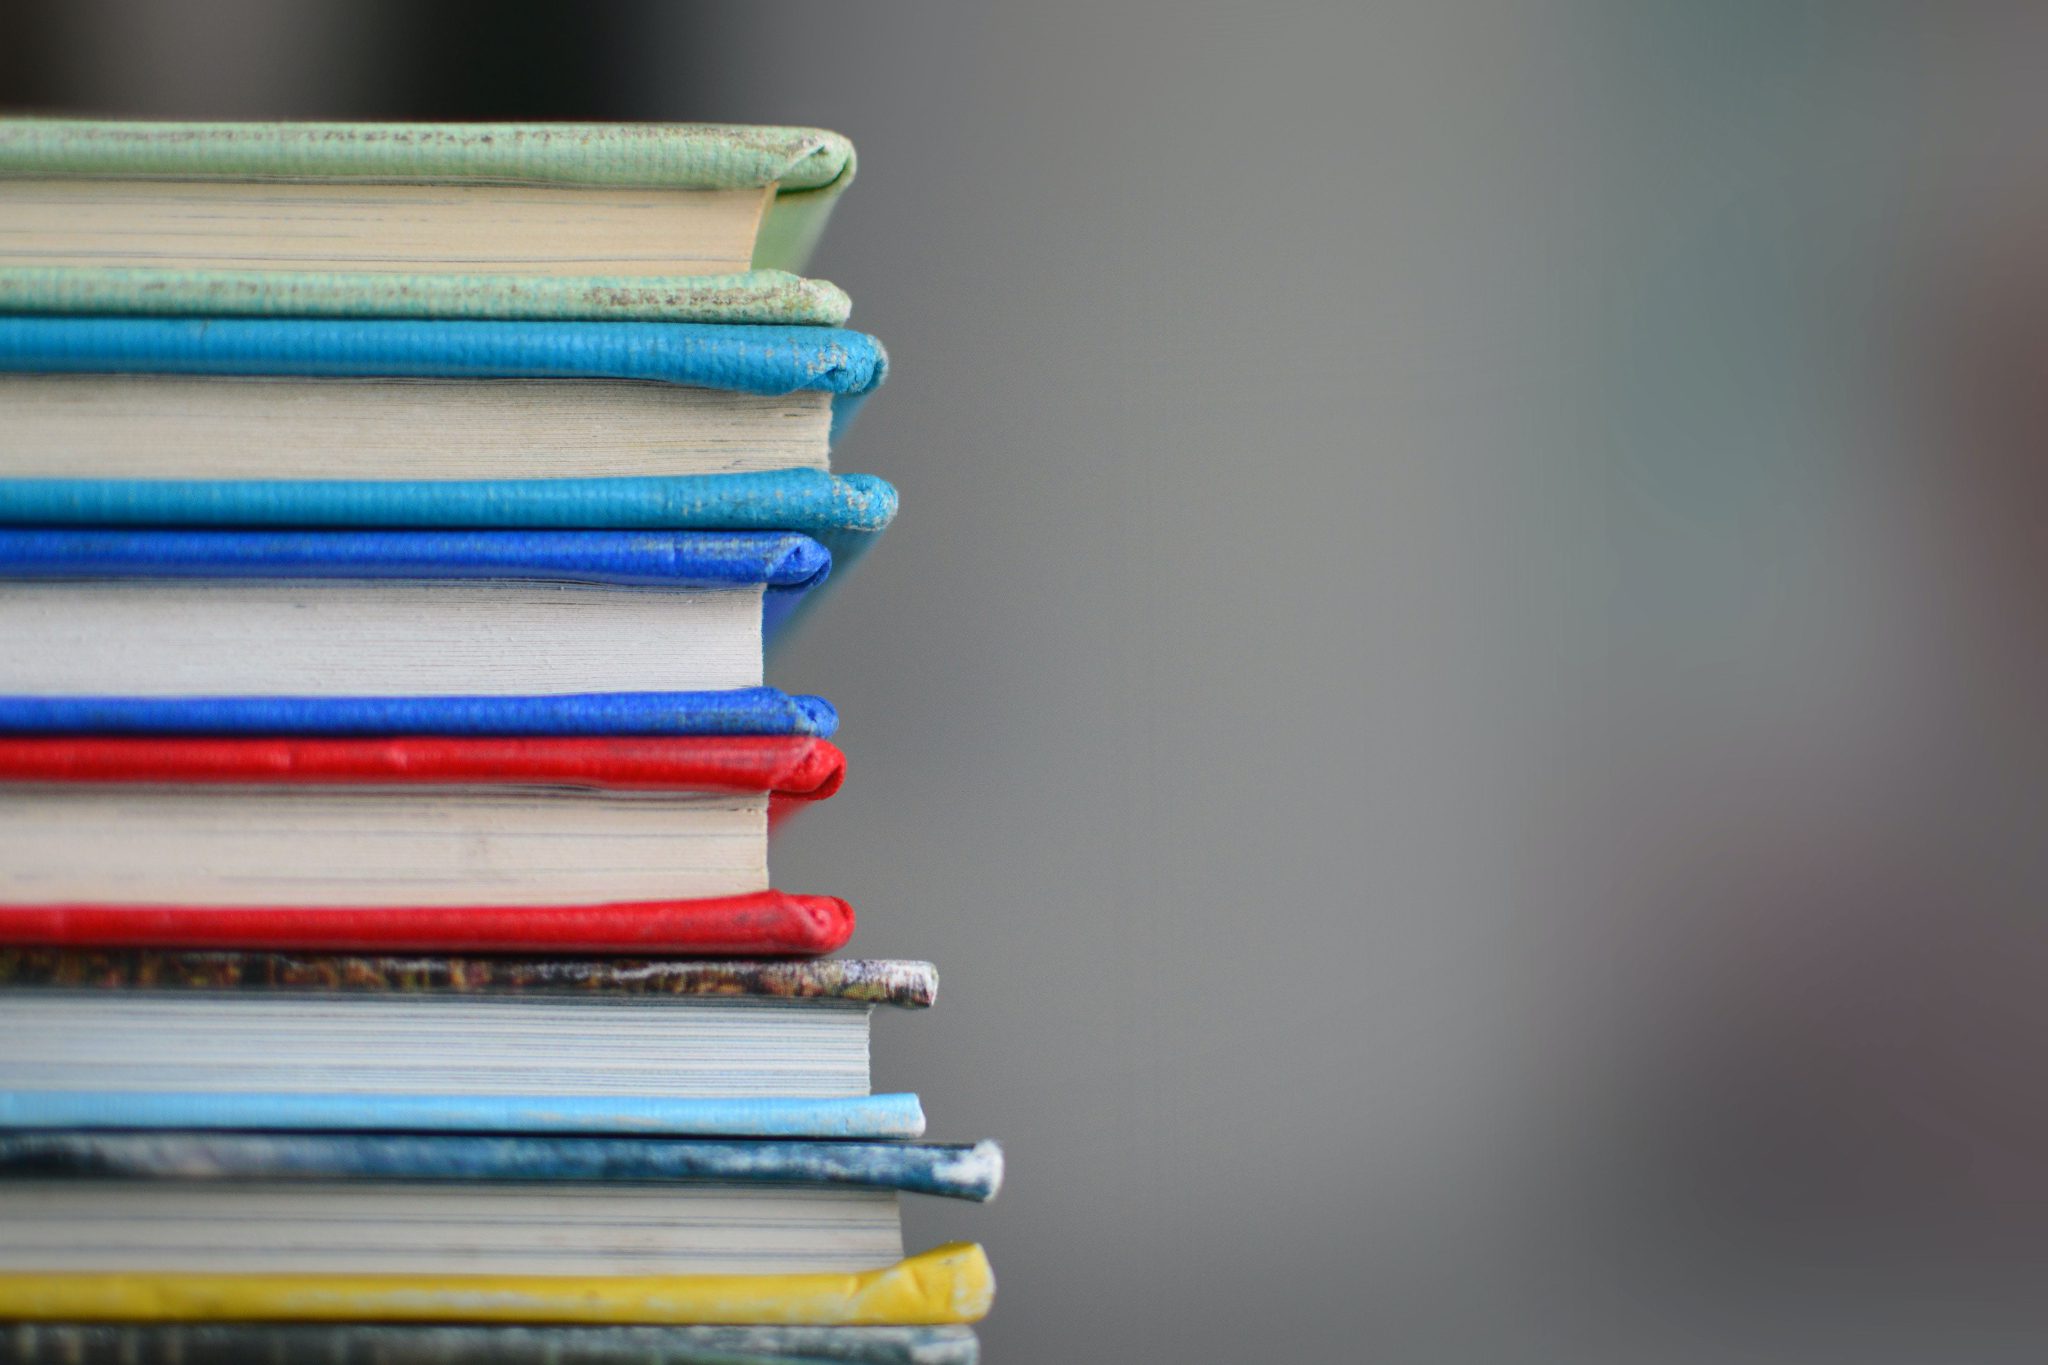 Stack of multicolored books. This page contains information about grants for writers and print projects.